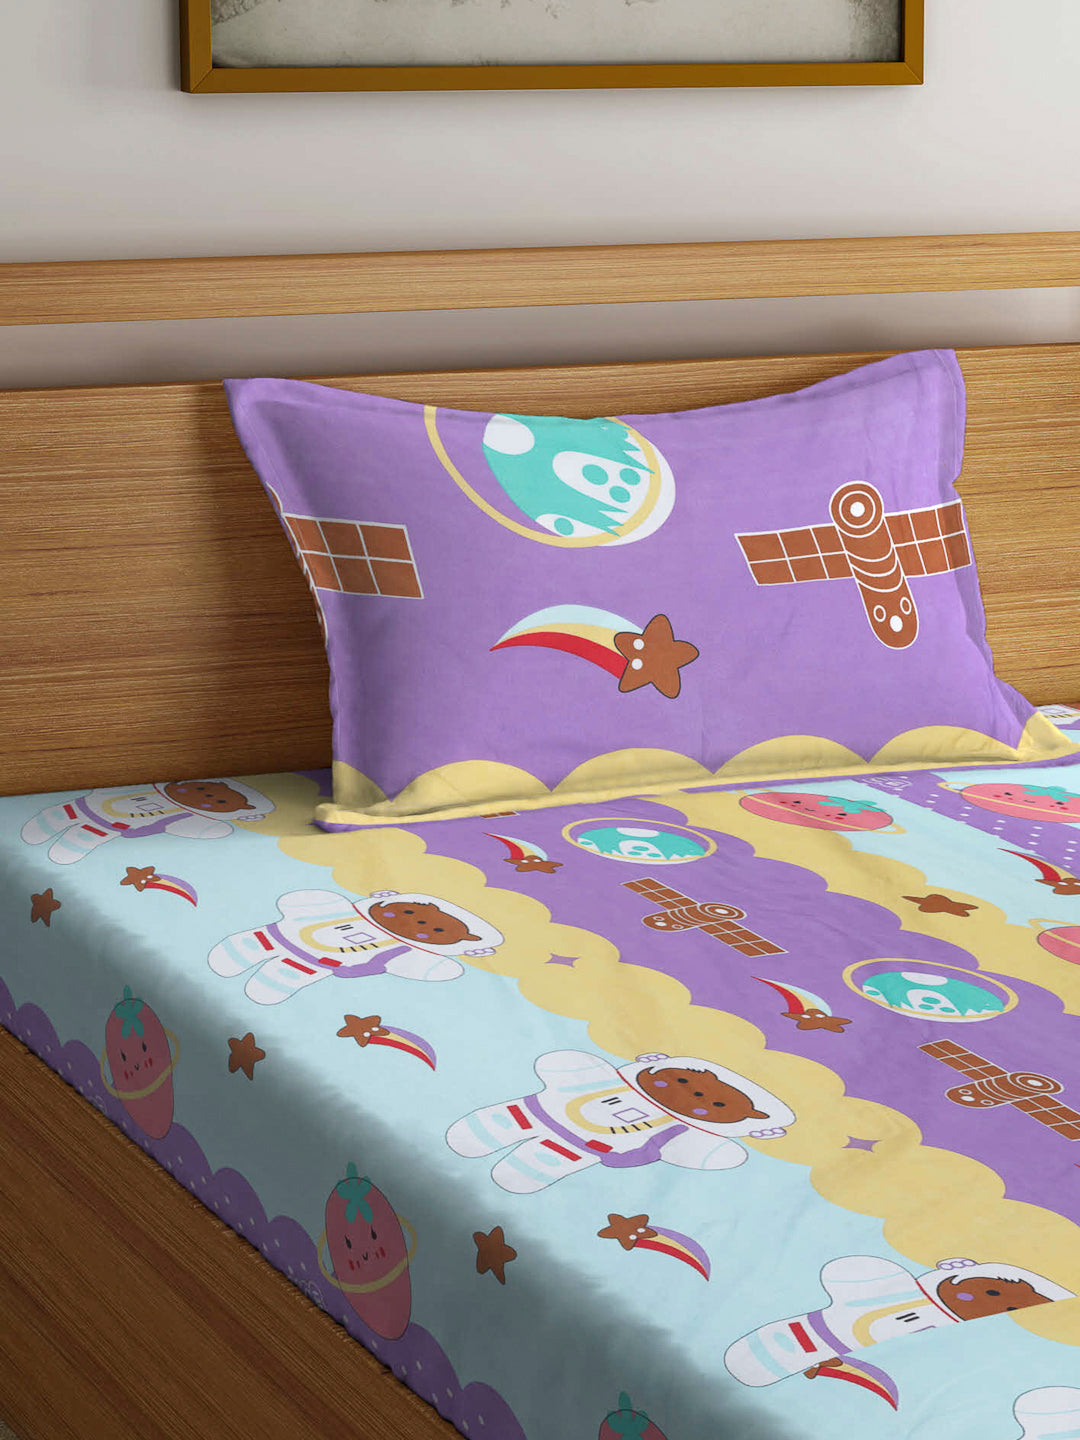 Arrabi Multi Cartoon TC Cotton Blend Single Size Fitted Bedsheet with 1 Pillow Cover (220 x 150cm)